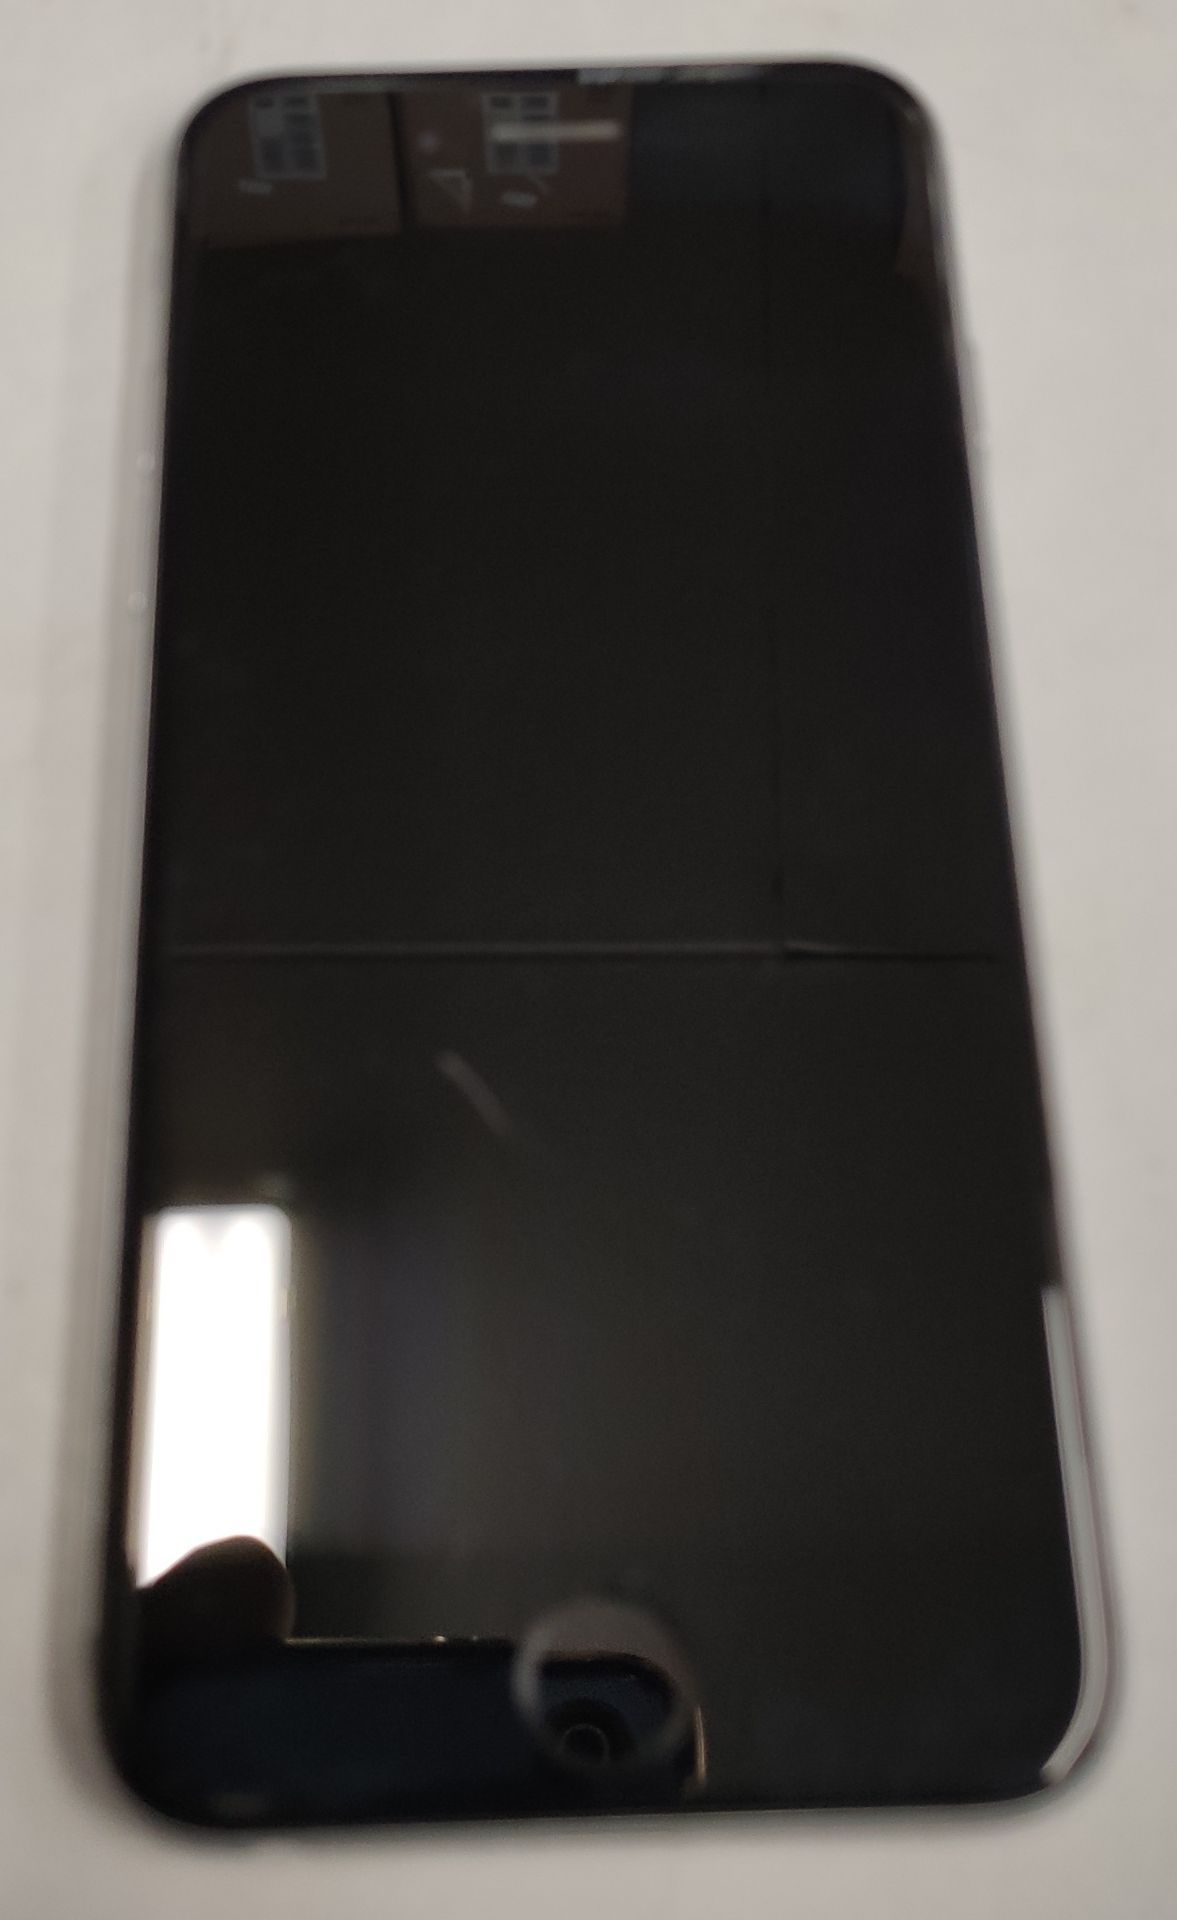 A pre-owned Apple iPhone 6 A1586 16GB in Space Gray (IMEI: 352074065559212) (iCloud activation